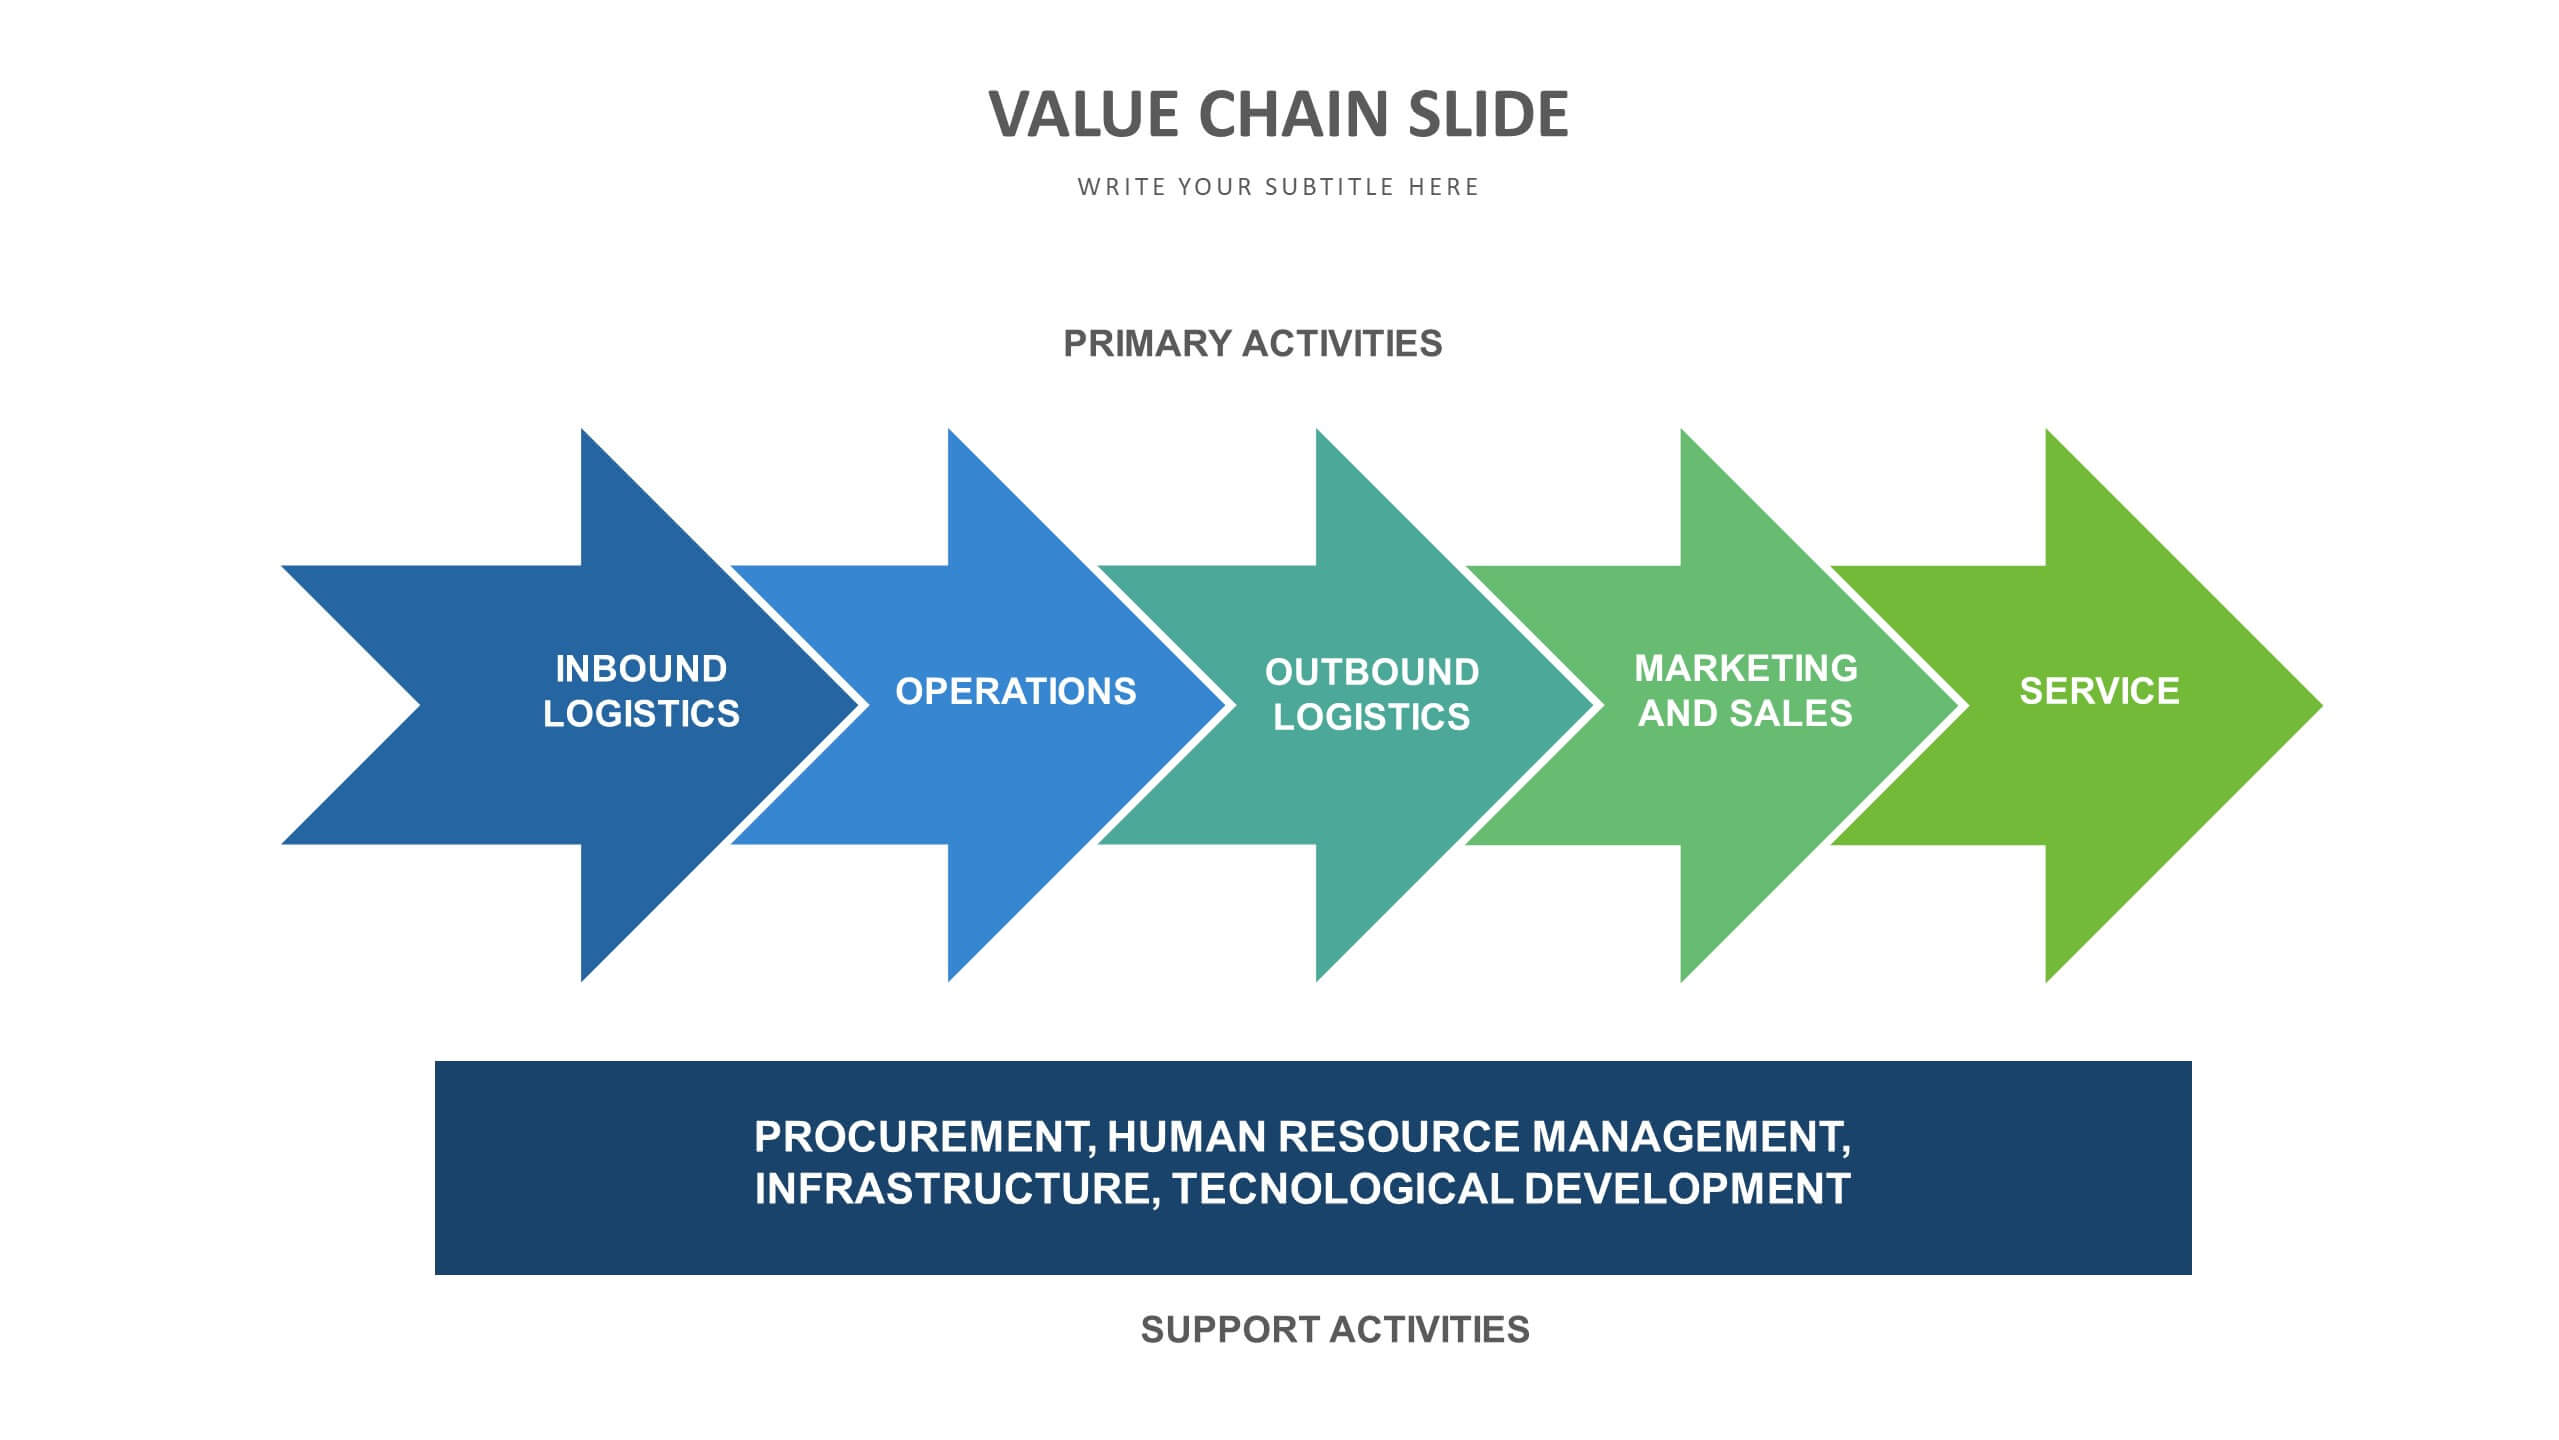 Value Chain Analysis Template Free 5161